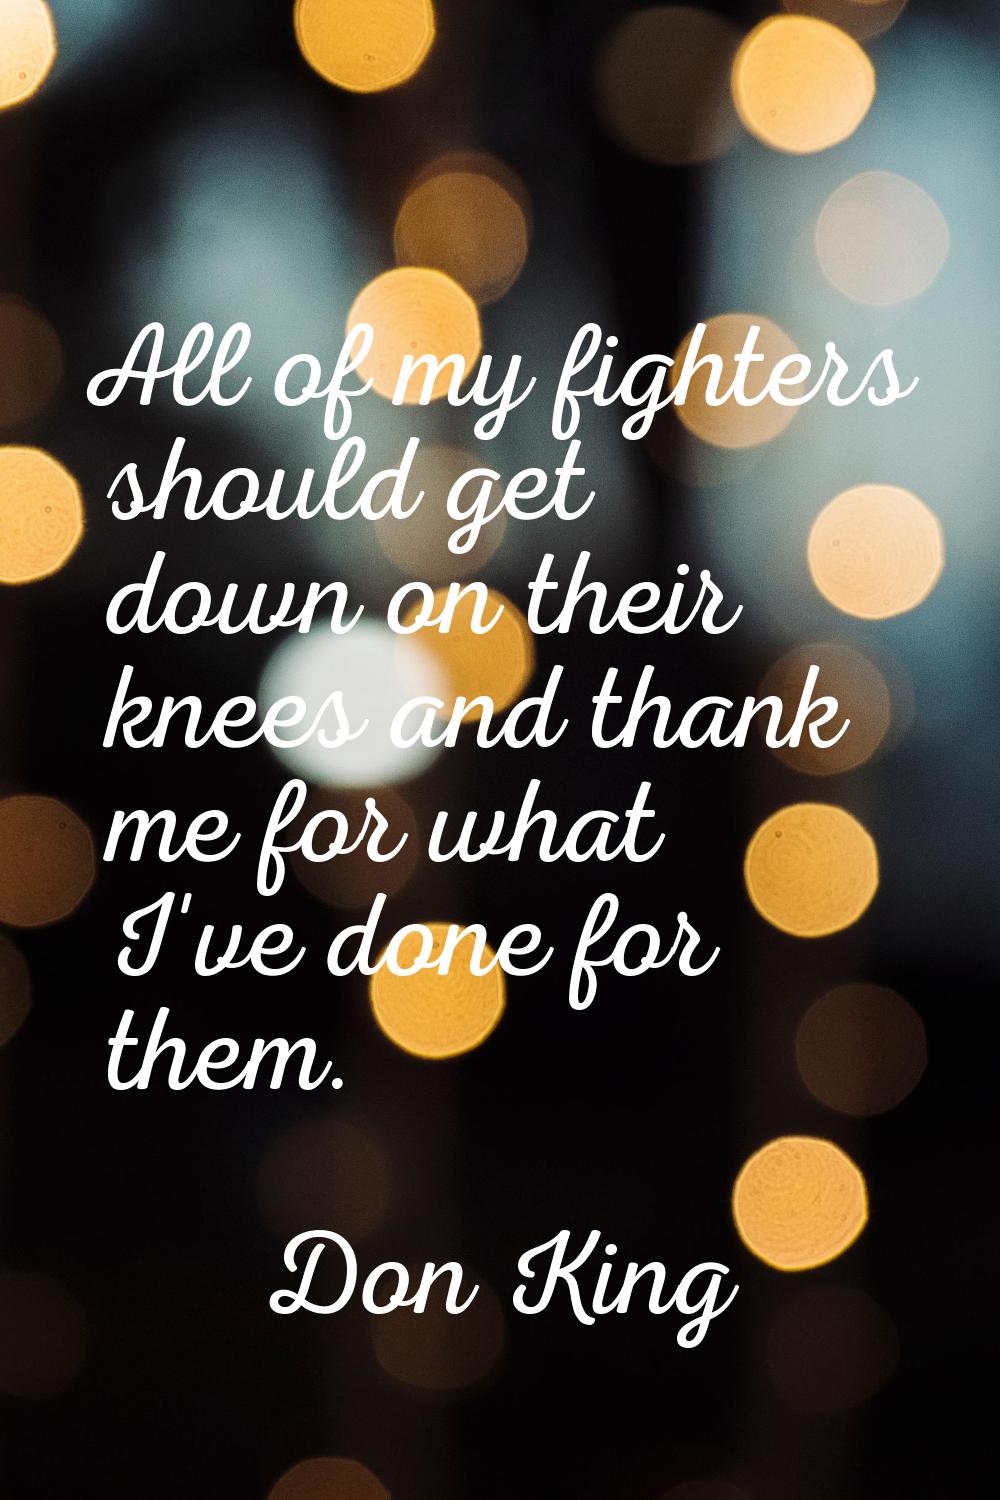 All of my fighters should get down on their knees and thank me for what I've done for them.